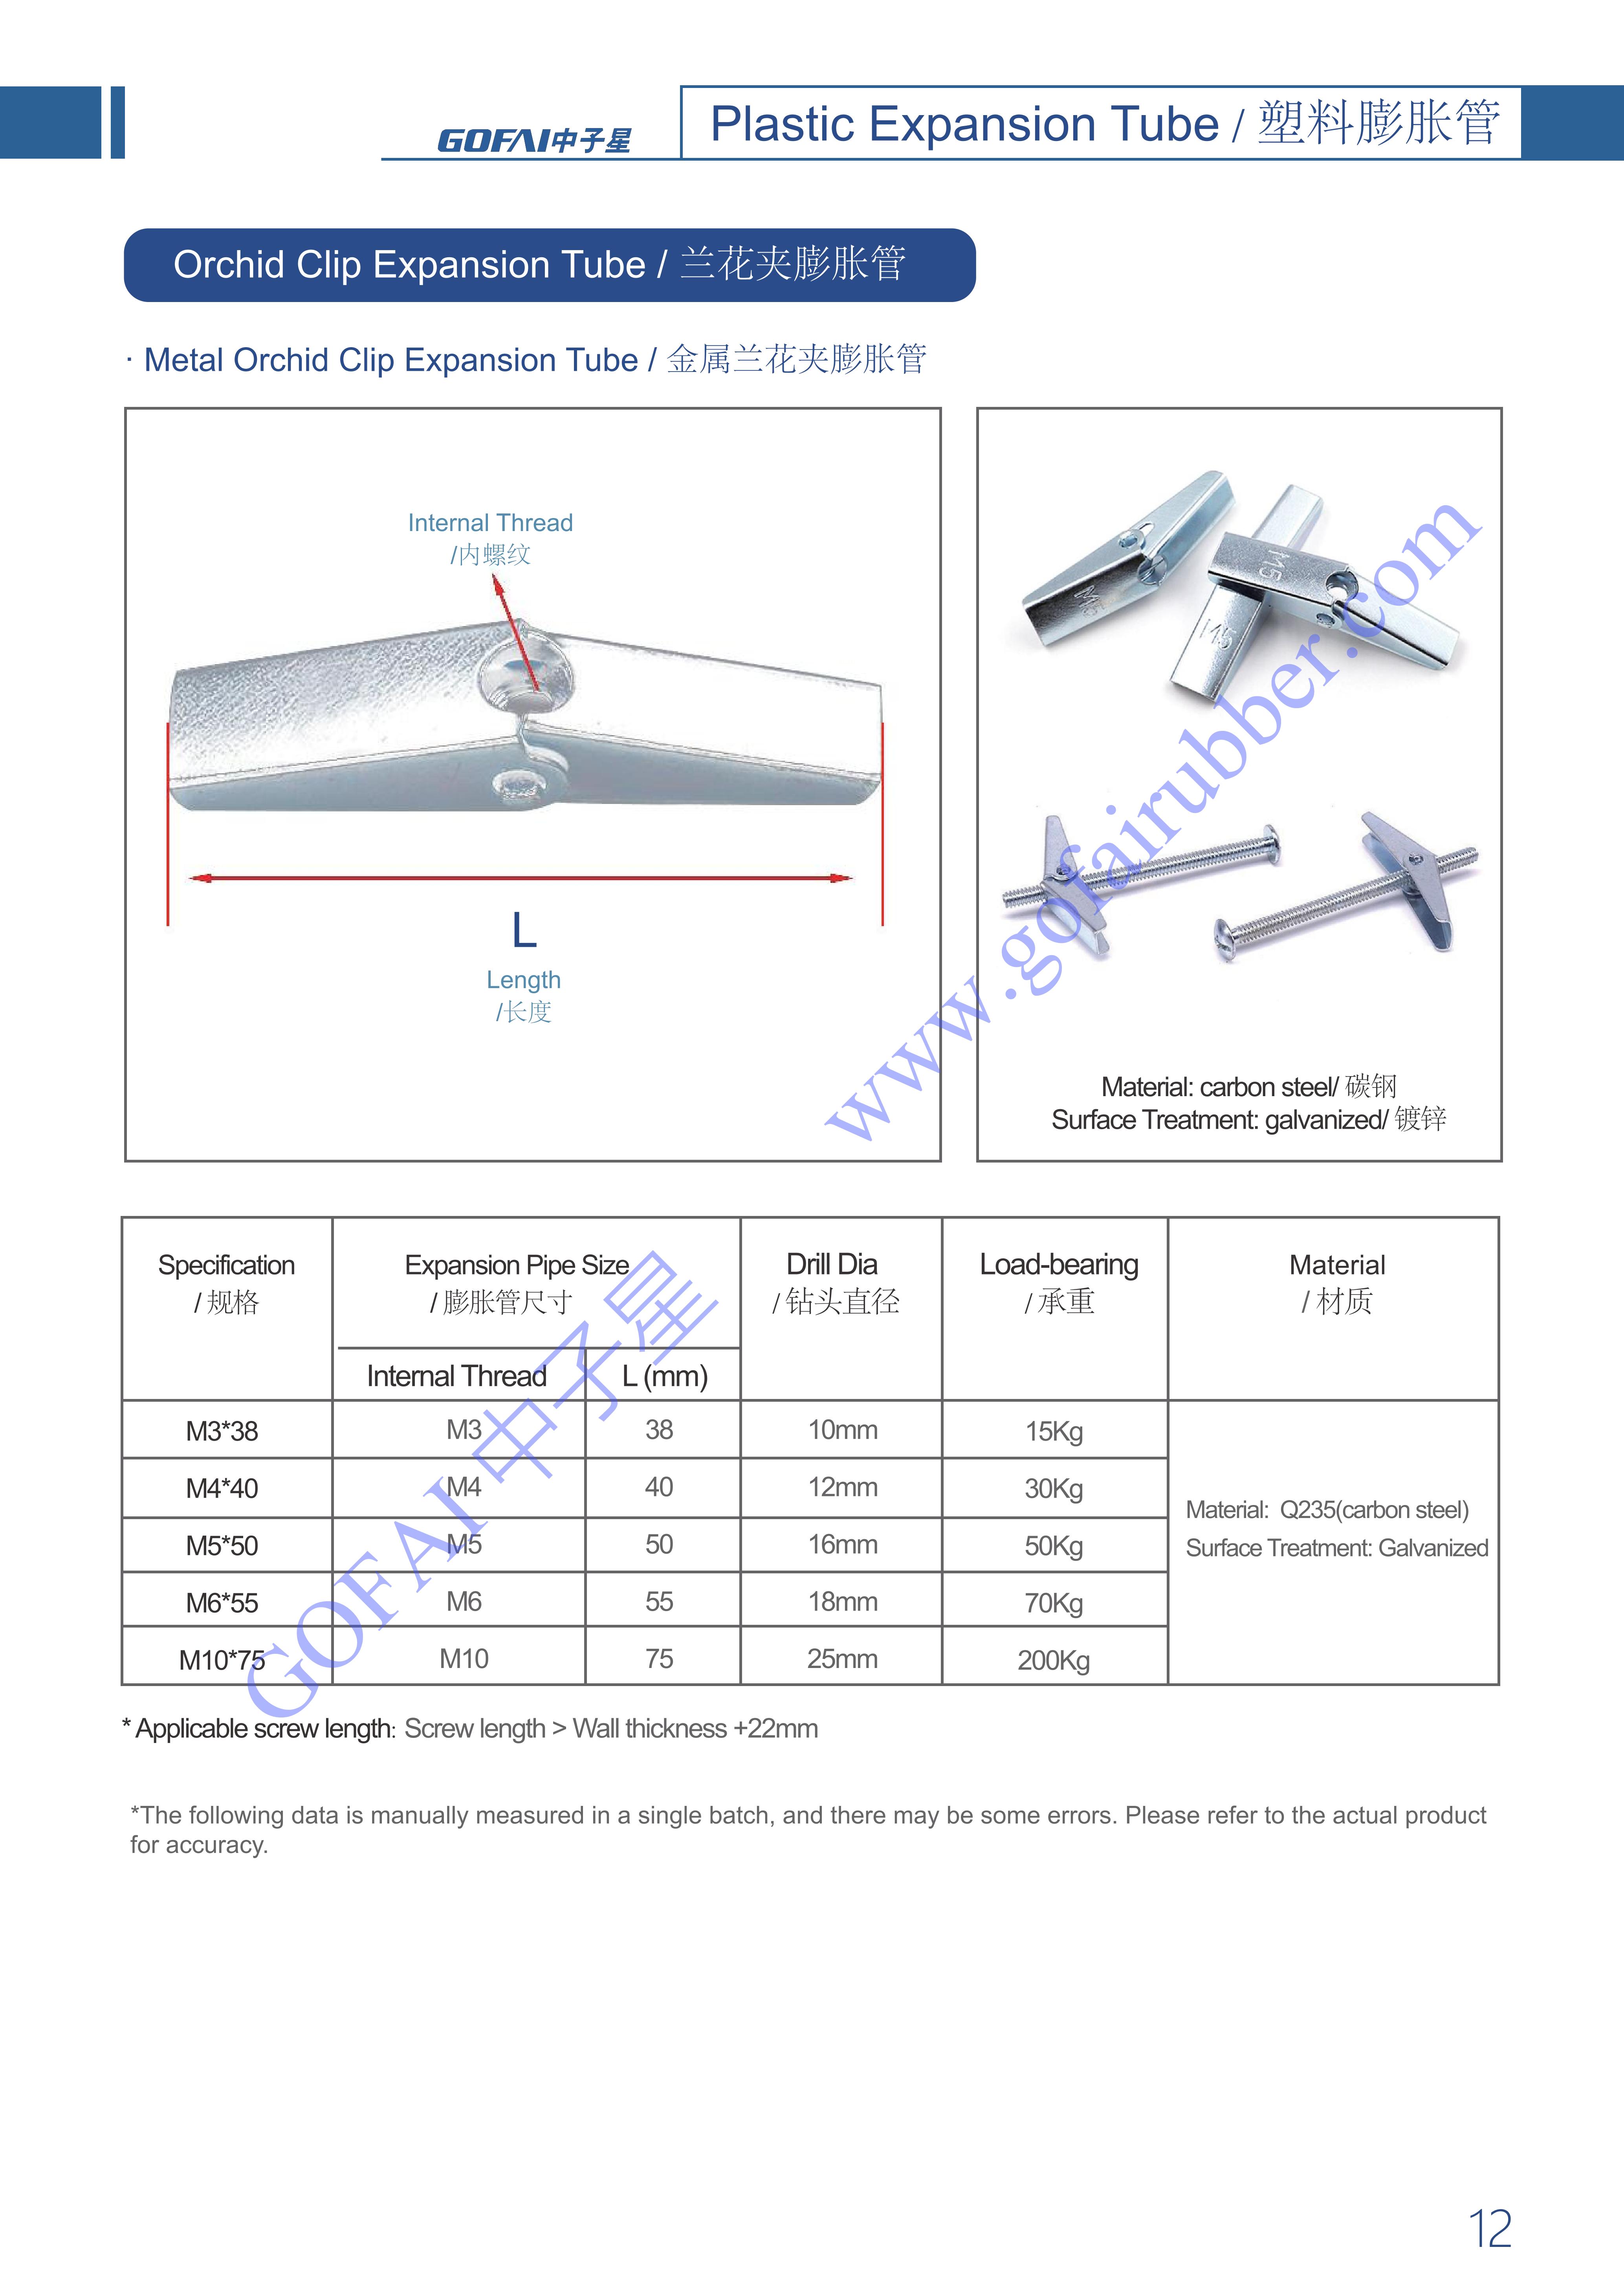 GOFAI Plastic Expansion Tube Series Products Brochure_13.jpg